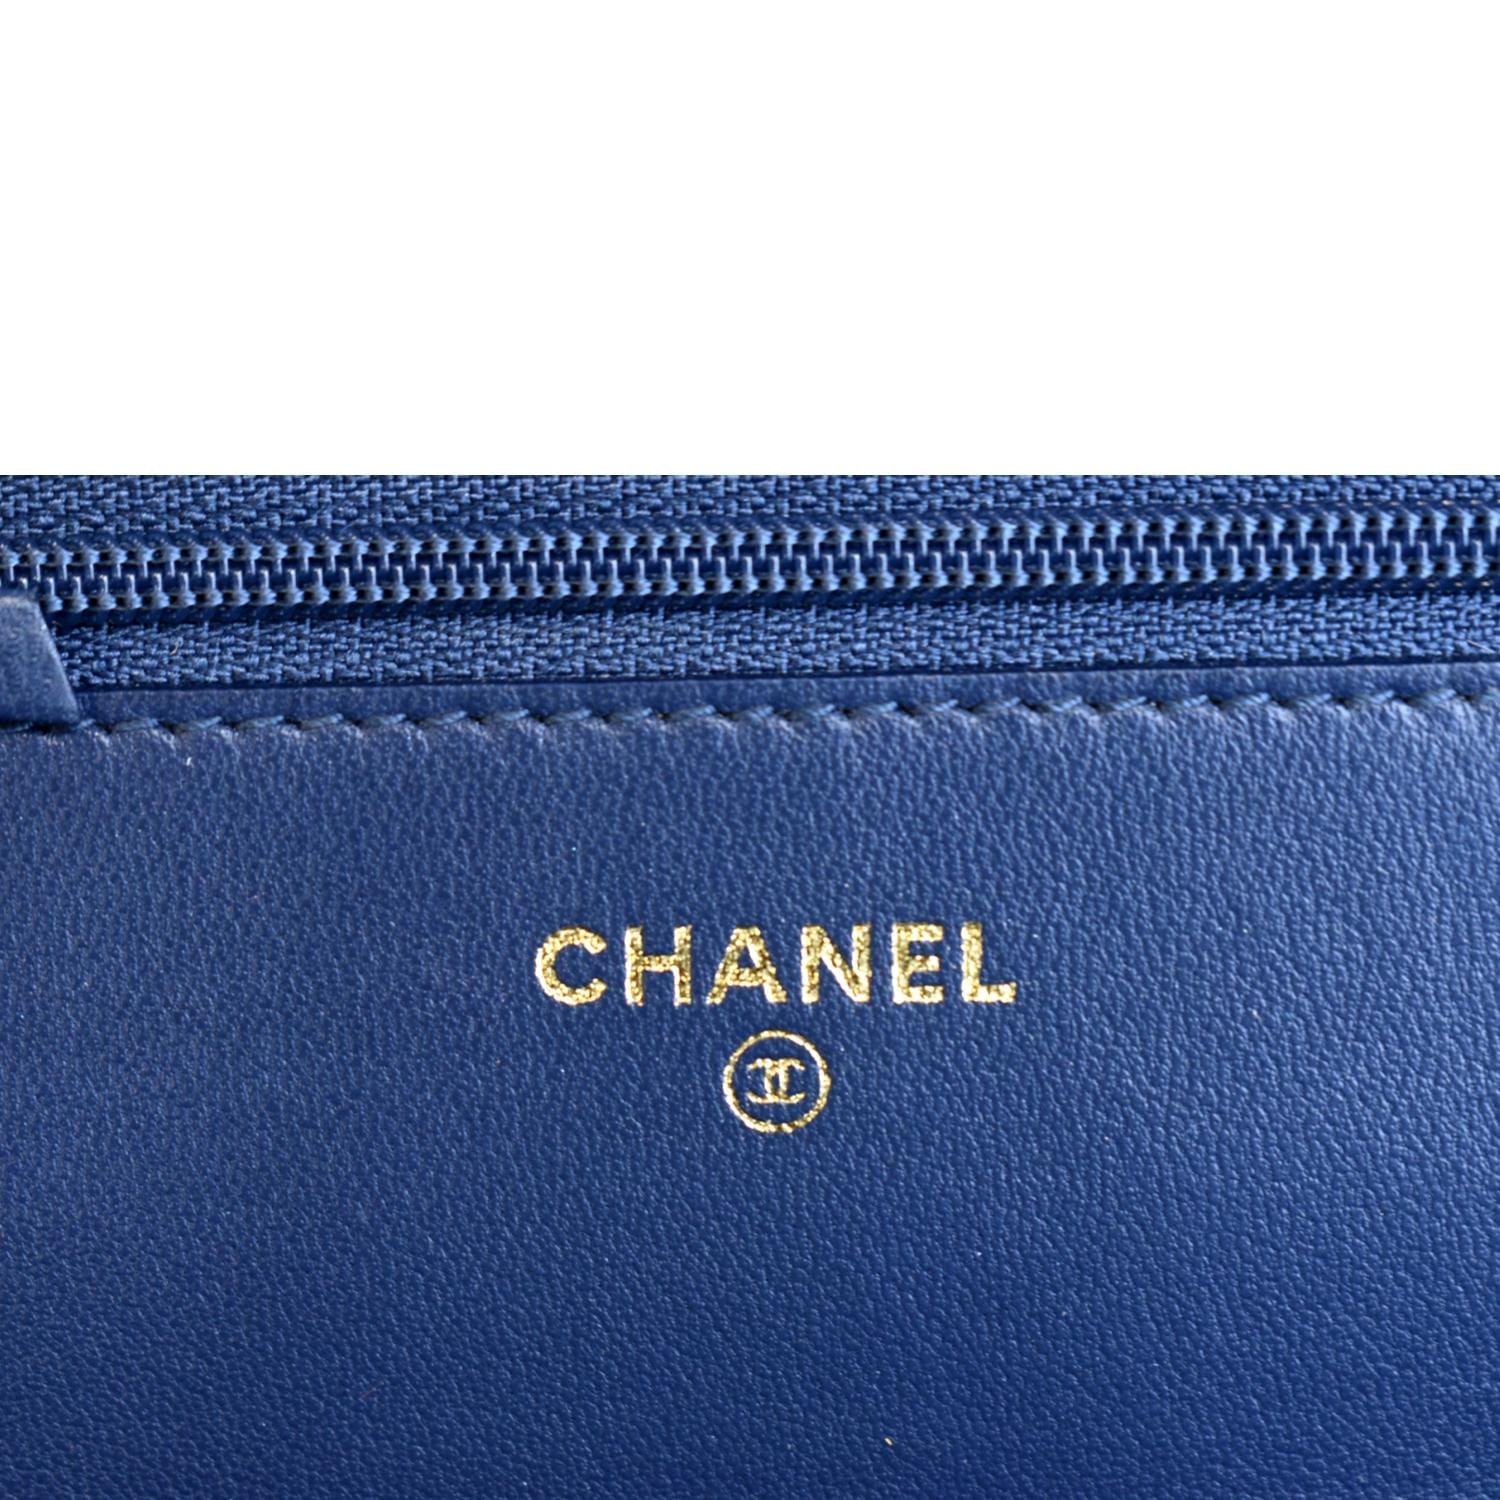 Chanel Royal Blue Python Leather Top Handle Bag with Gold Hardware